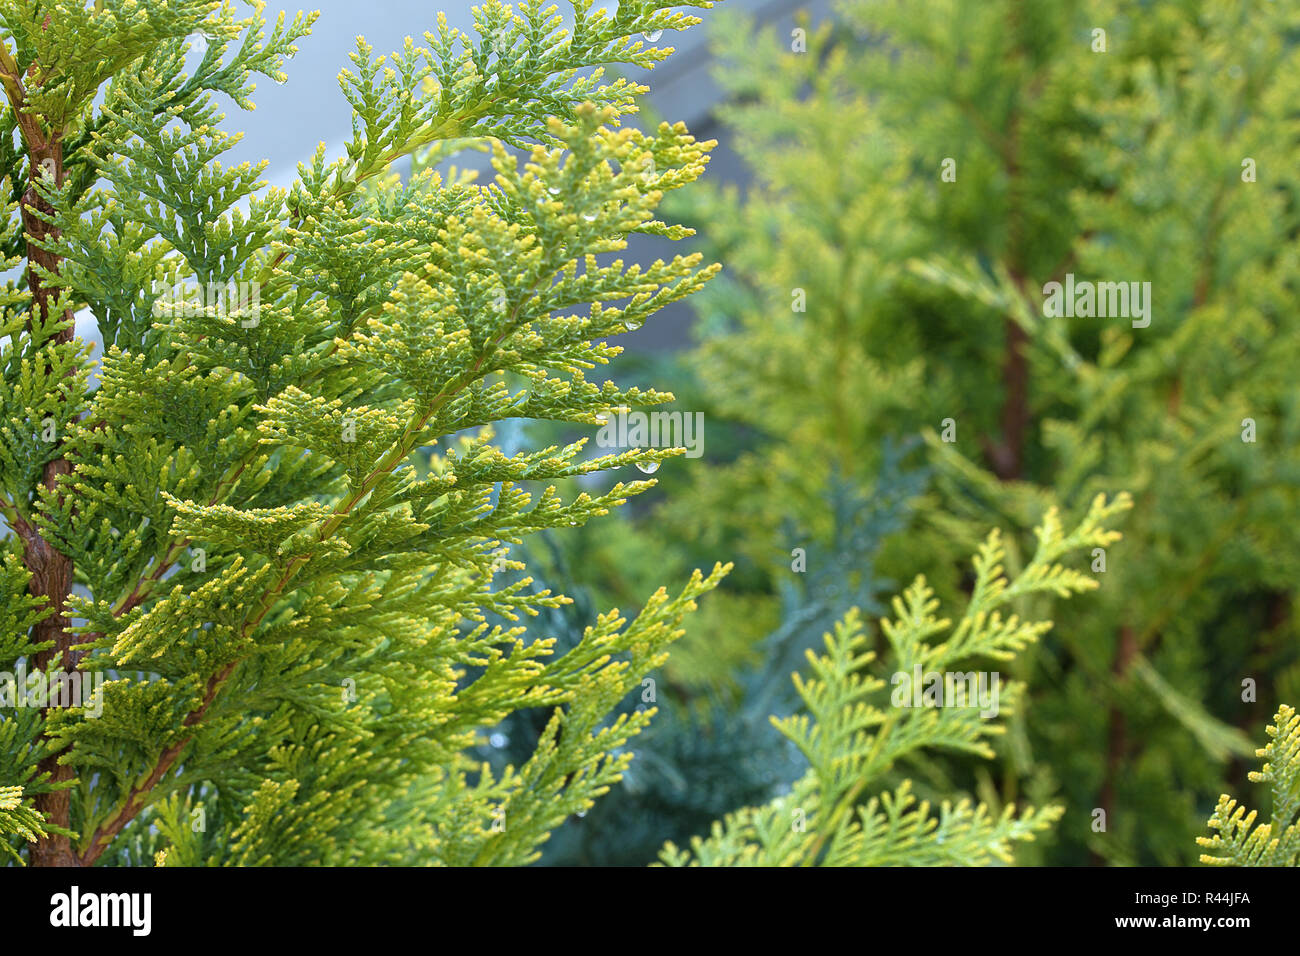 Lawson Cypress tree with water drops background, Lawson Cypress Tree wallpaper, Chamaecyparis lawsonian desktop wallpaper. Evergreen conifer, close up Stock Photo